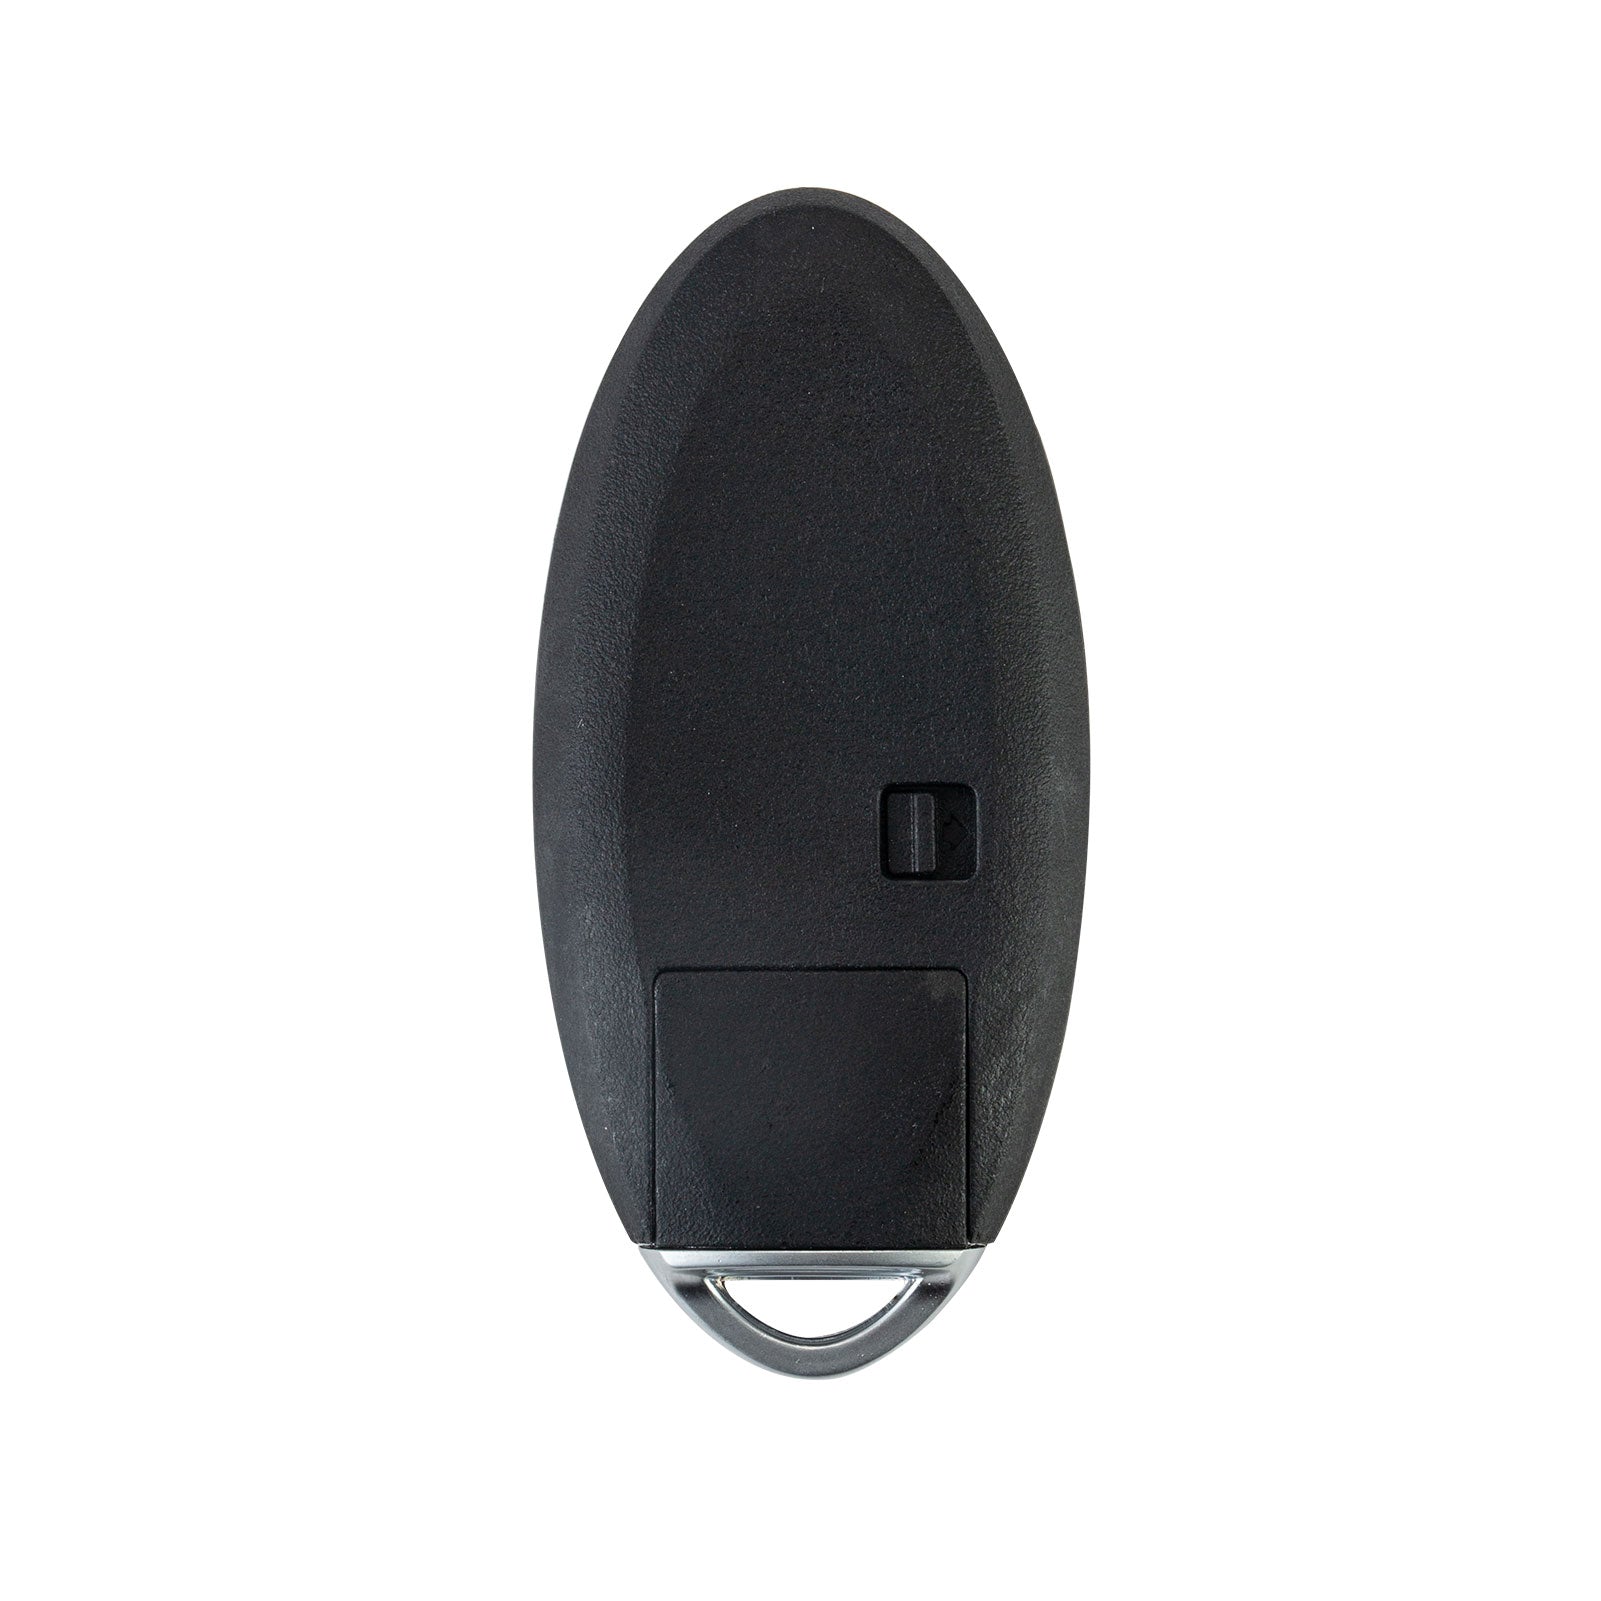 Smart Car Key Fob Keyless Entry Replacement for 2008-2013 Rogue 315MHZ CWTWBU729  KR-N3RD-05